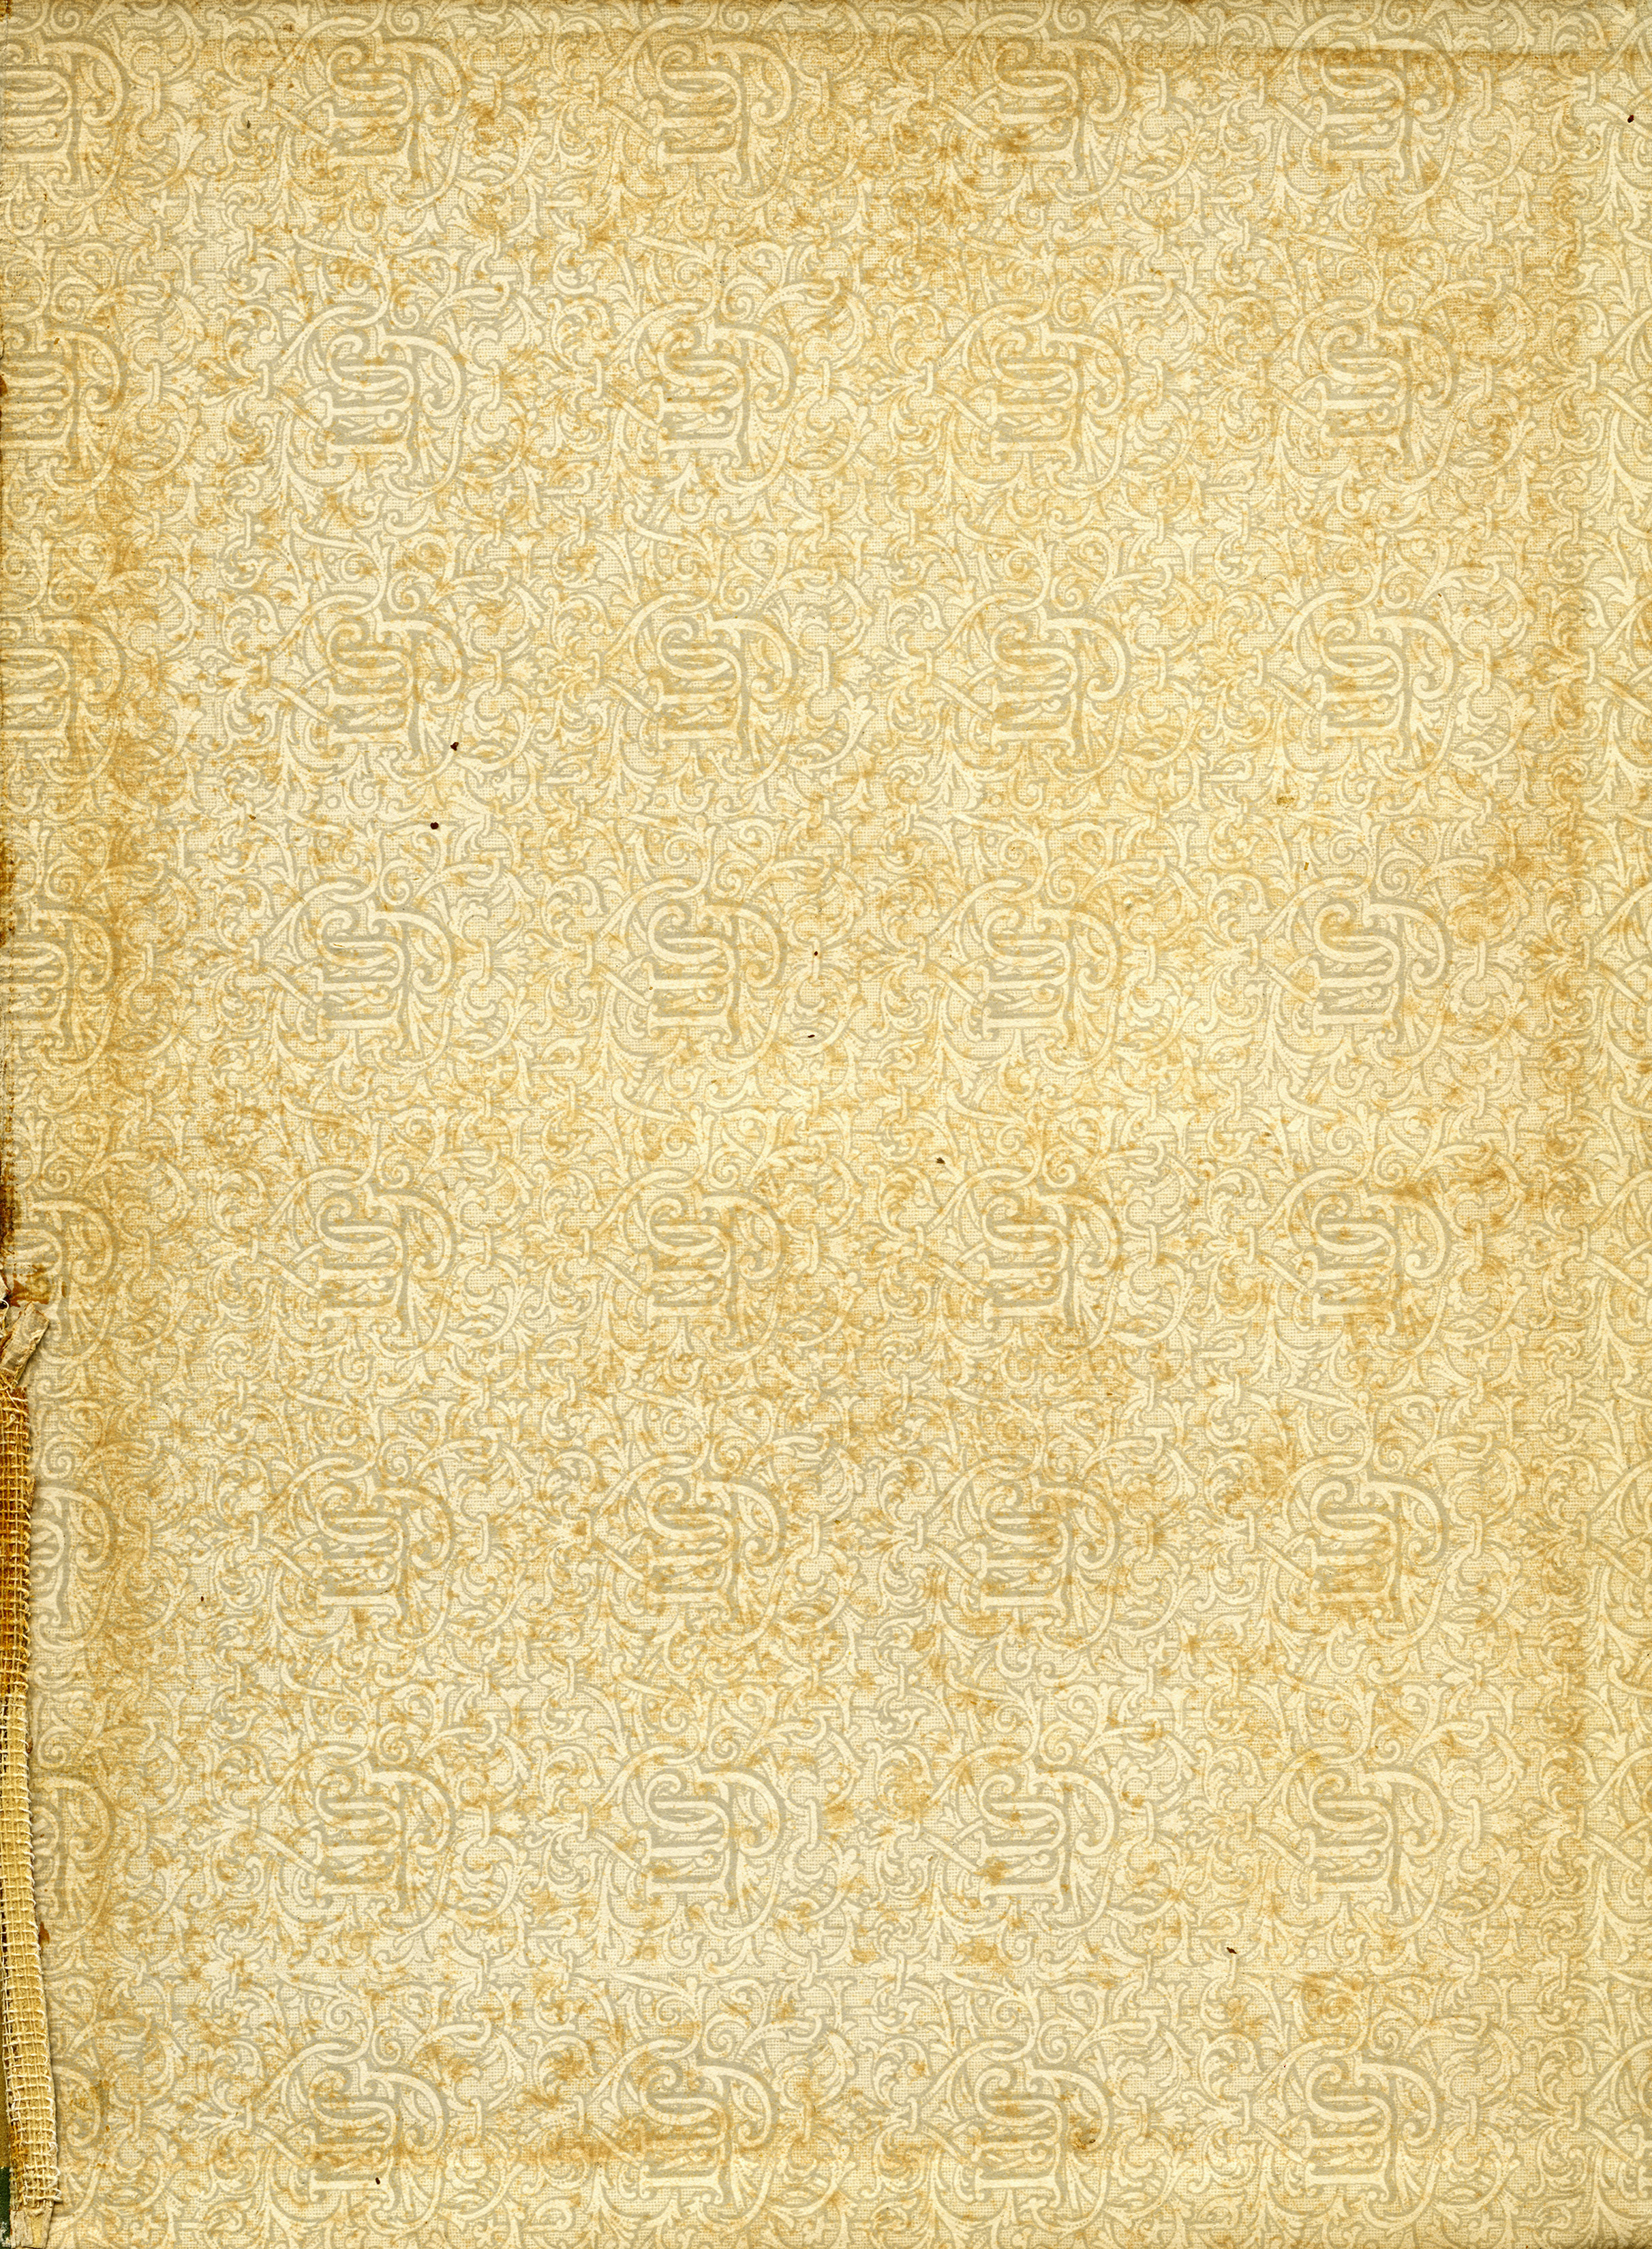 old book pages, aged paper texture, wrinkled stained endpaper, shabby vintage paper, free grunge graphics